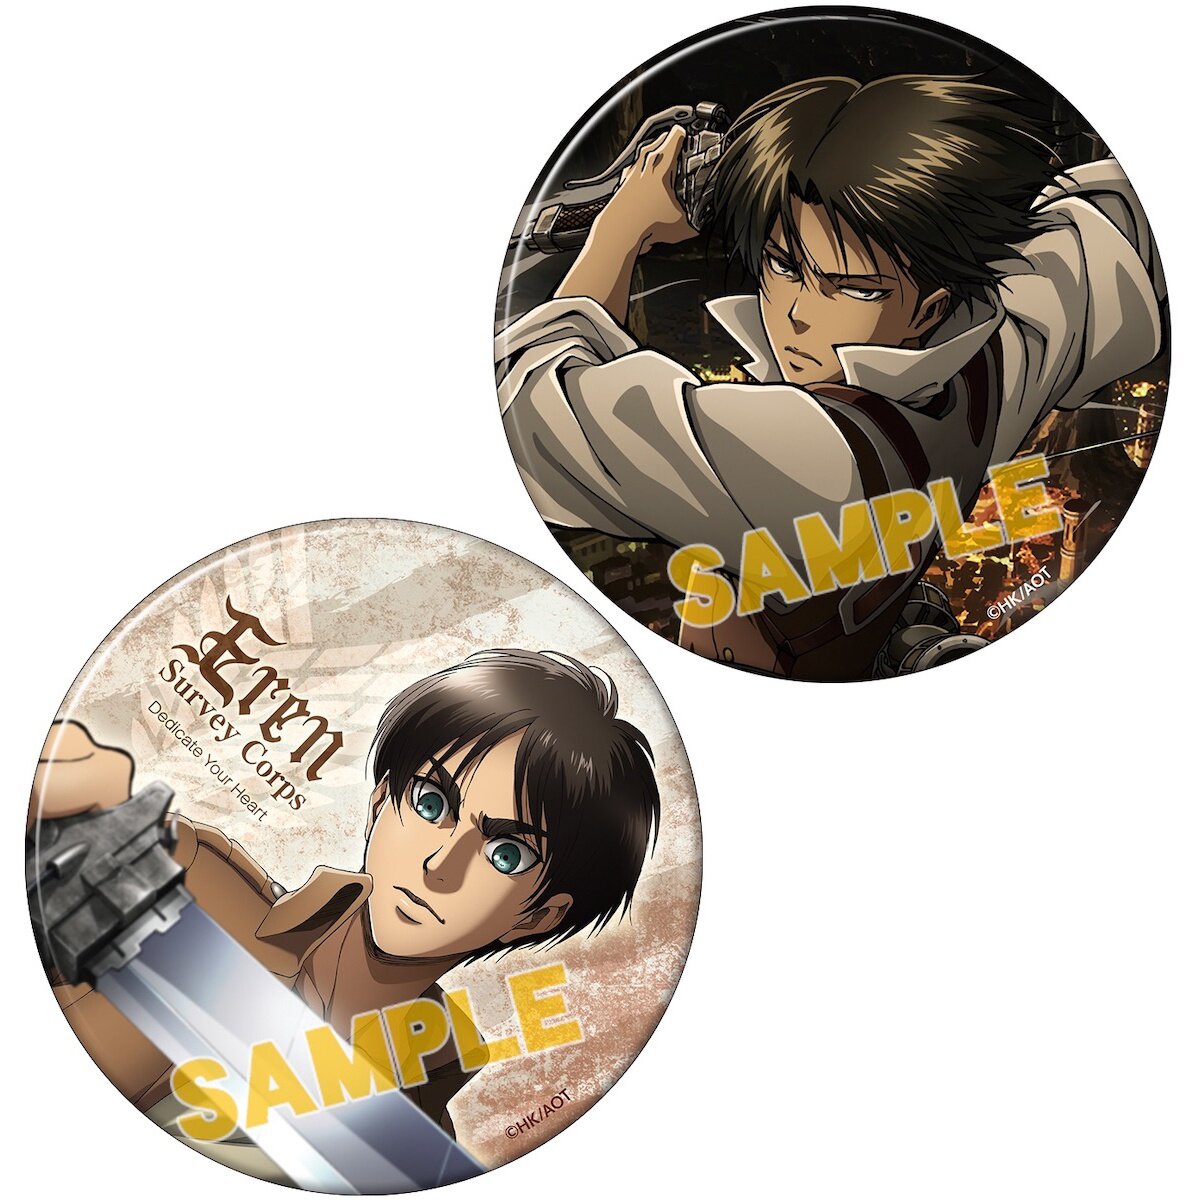 Pin by No . on Anime  Attack on titan anime, Attack on titan